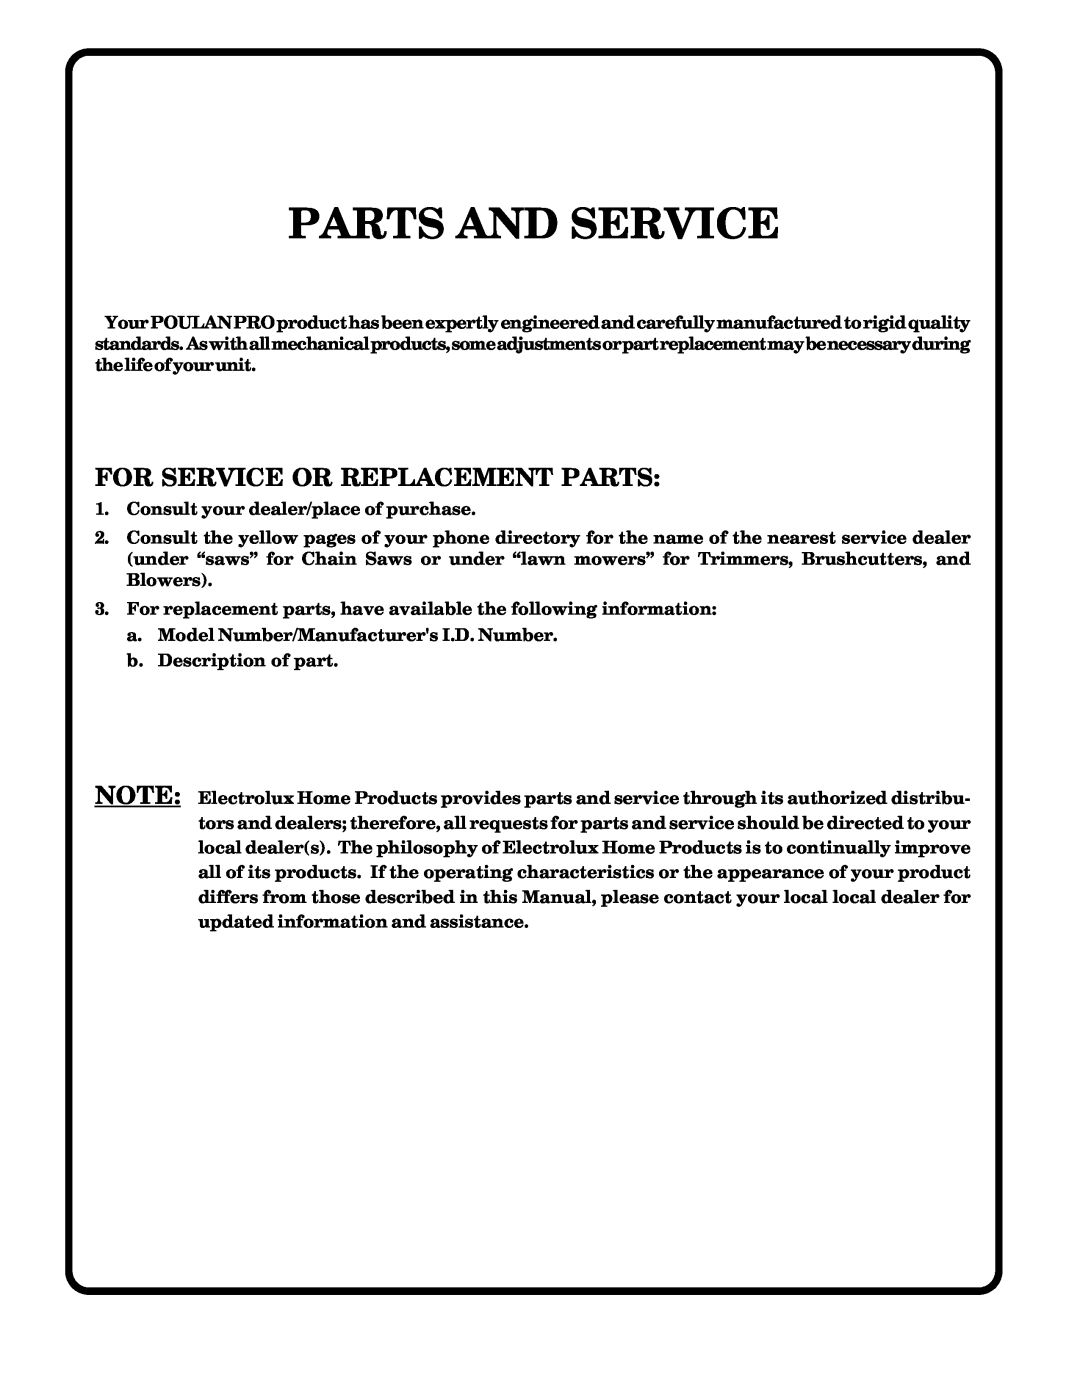 Poulan PR17H42STC, 178219 owner manual Parts And Service, For Service Or Replacement Parts 